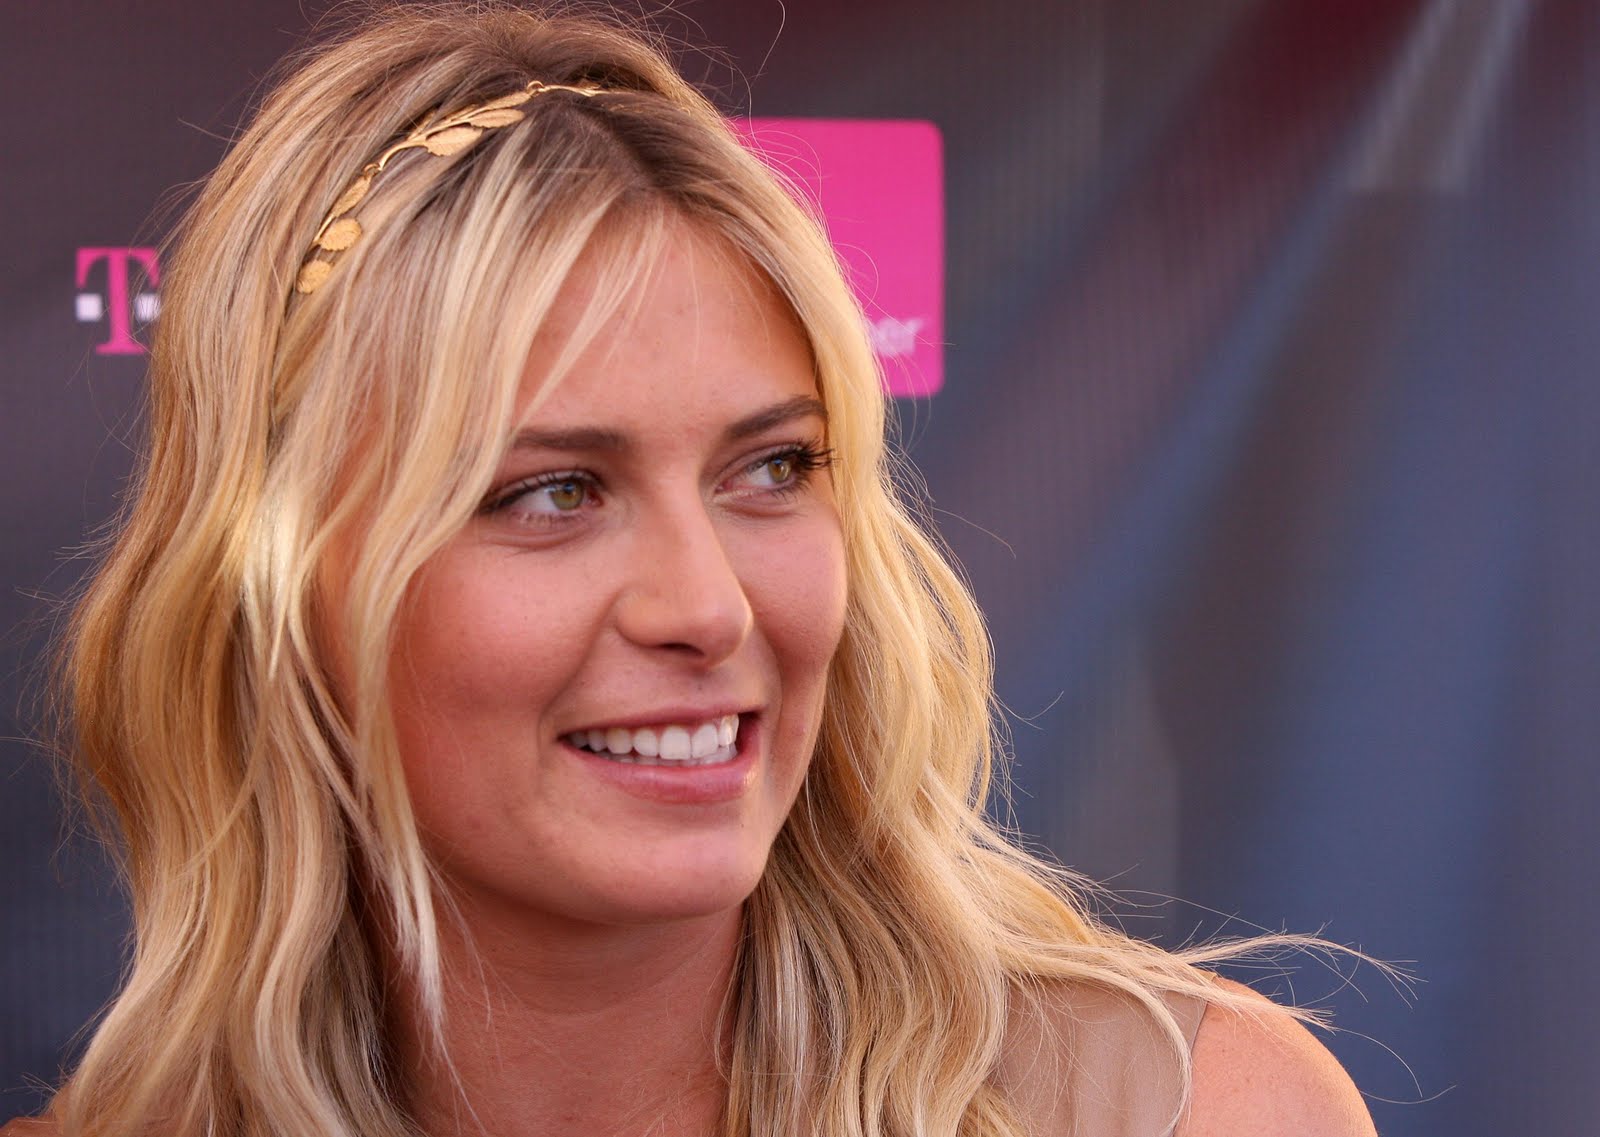 http://1.bp.blogspot.com/_b75UL5G9BPA/SwNnGILTKPI/AAAAAAAAHxE/IEC3C2rS8ZM/s1600/78706_ie_-_Maria_Sharapova_at_the_T-Mobile_and_Sony_Ericsson_Maria_Sharapova_Look-a-like_contest_at_the_new_T-Mobile_store_in_Canoga_Park_-_Oct__31_2009_1742_122_214lo-799825.jpg